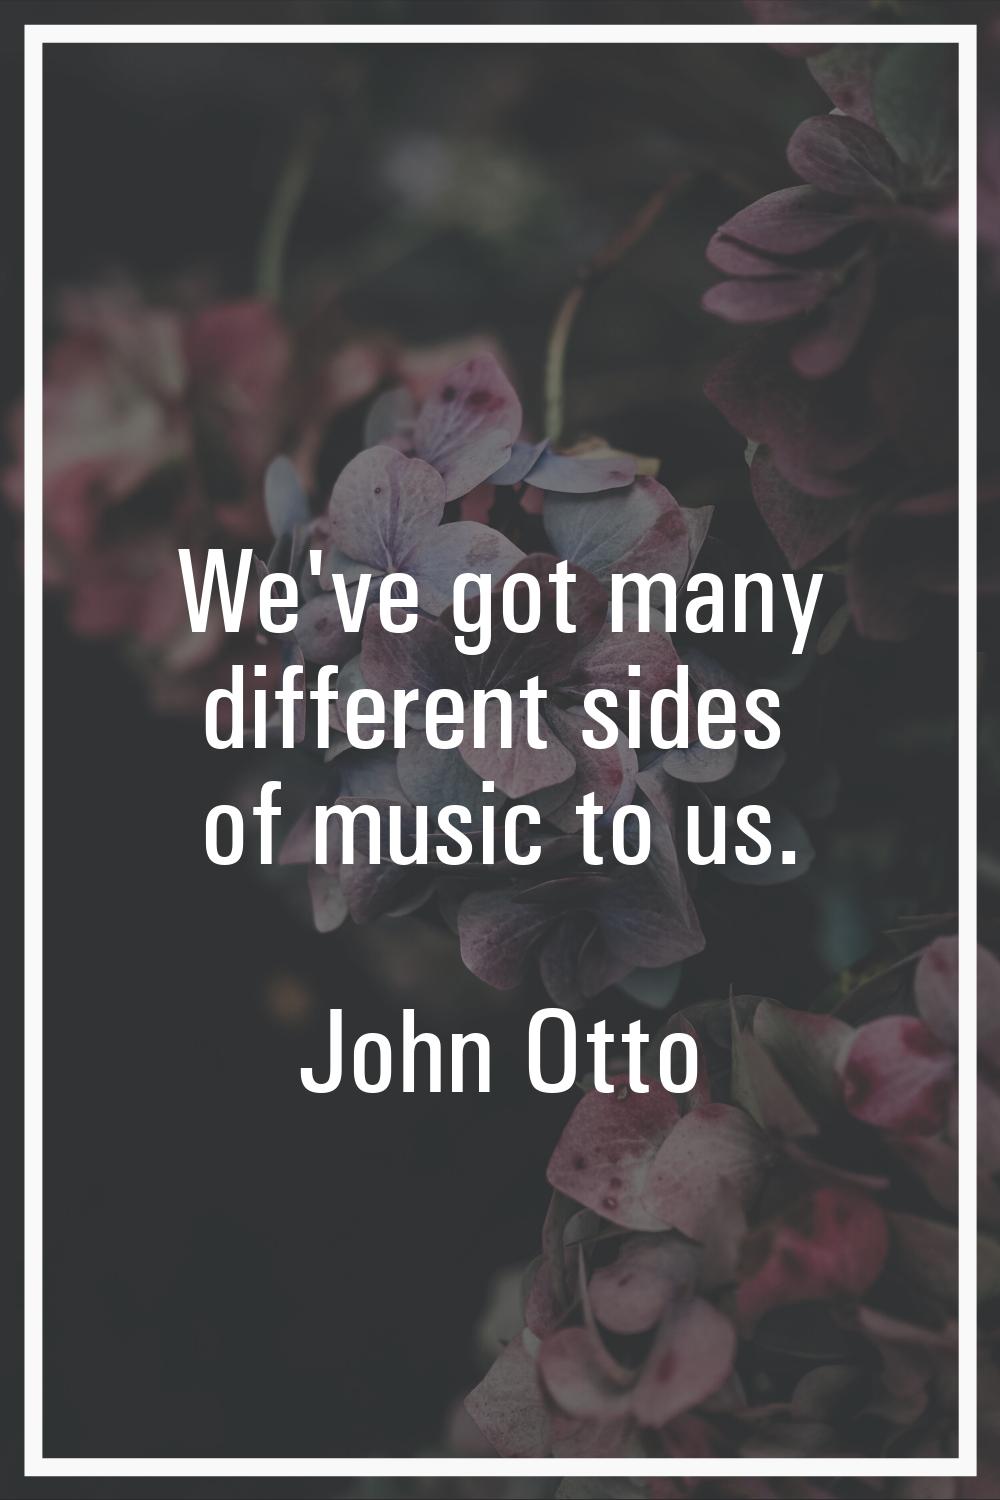 We've got many different sides of music to us.